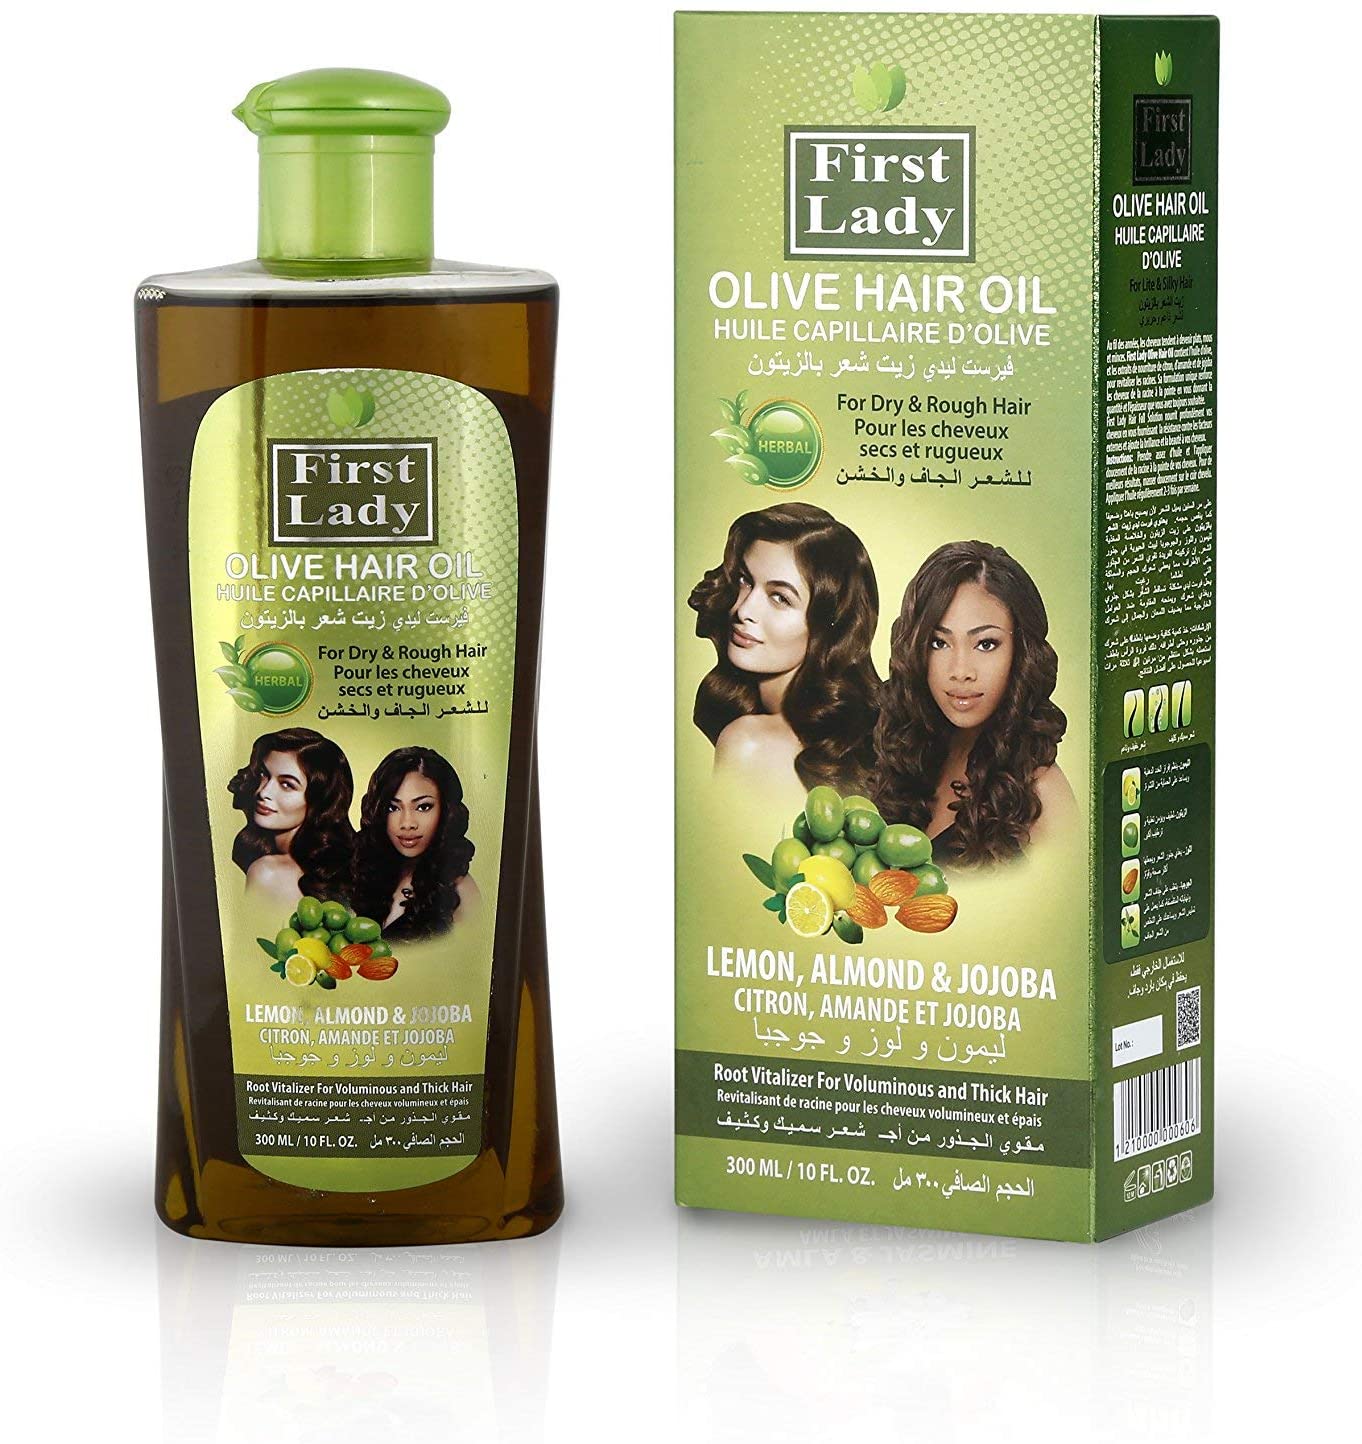 First Lady Olive Hair Oil contains Olive, Lemon, Almond & Jojoba extracts. The unique formulatiion strengthens hair strands, provides volume & thickness.